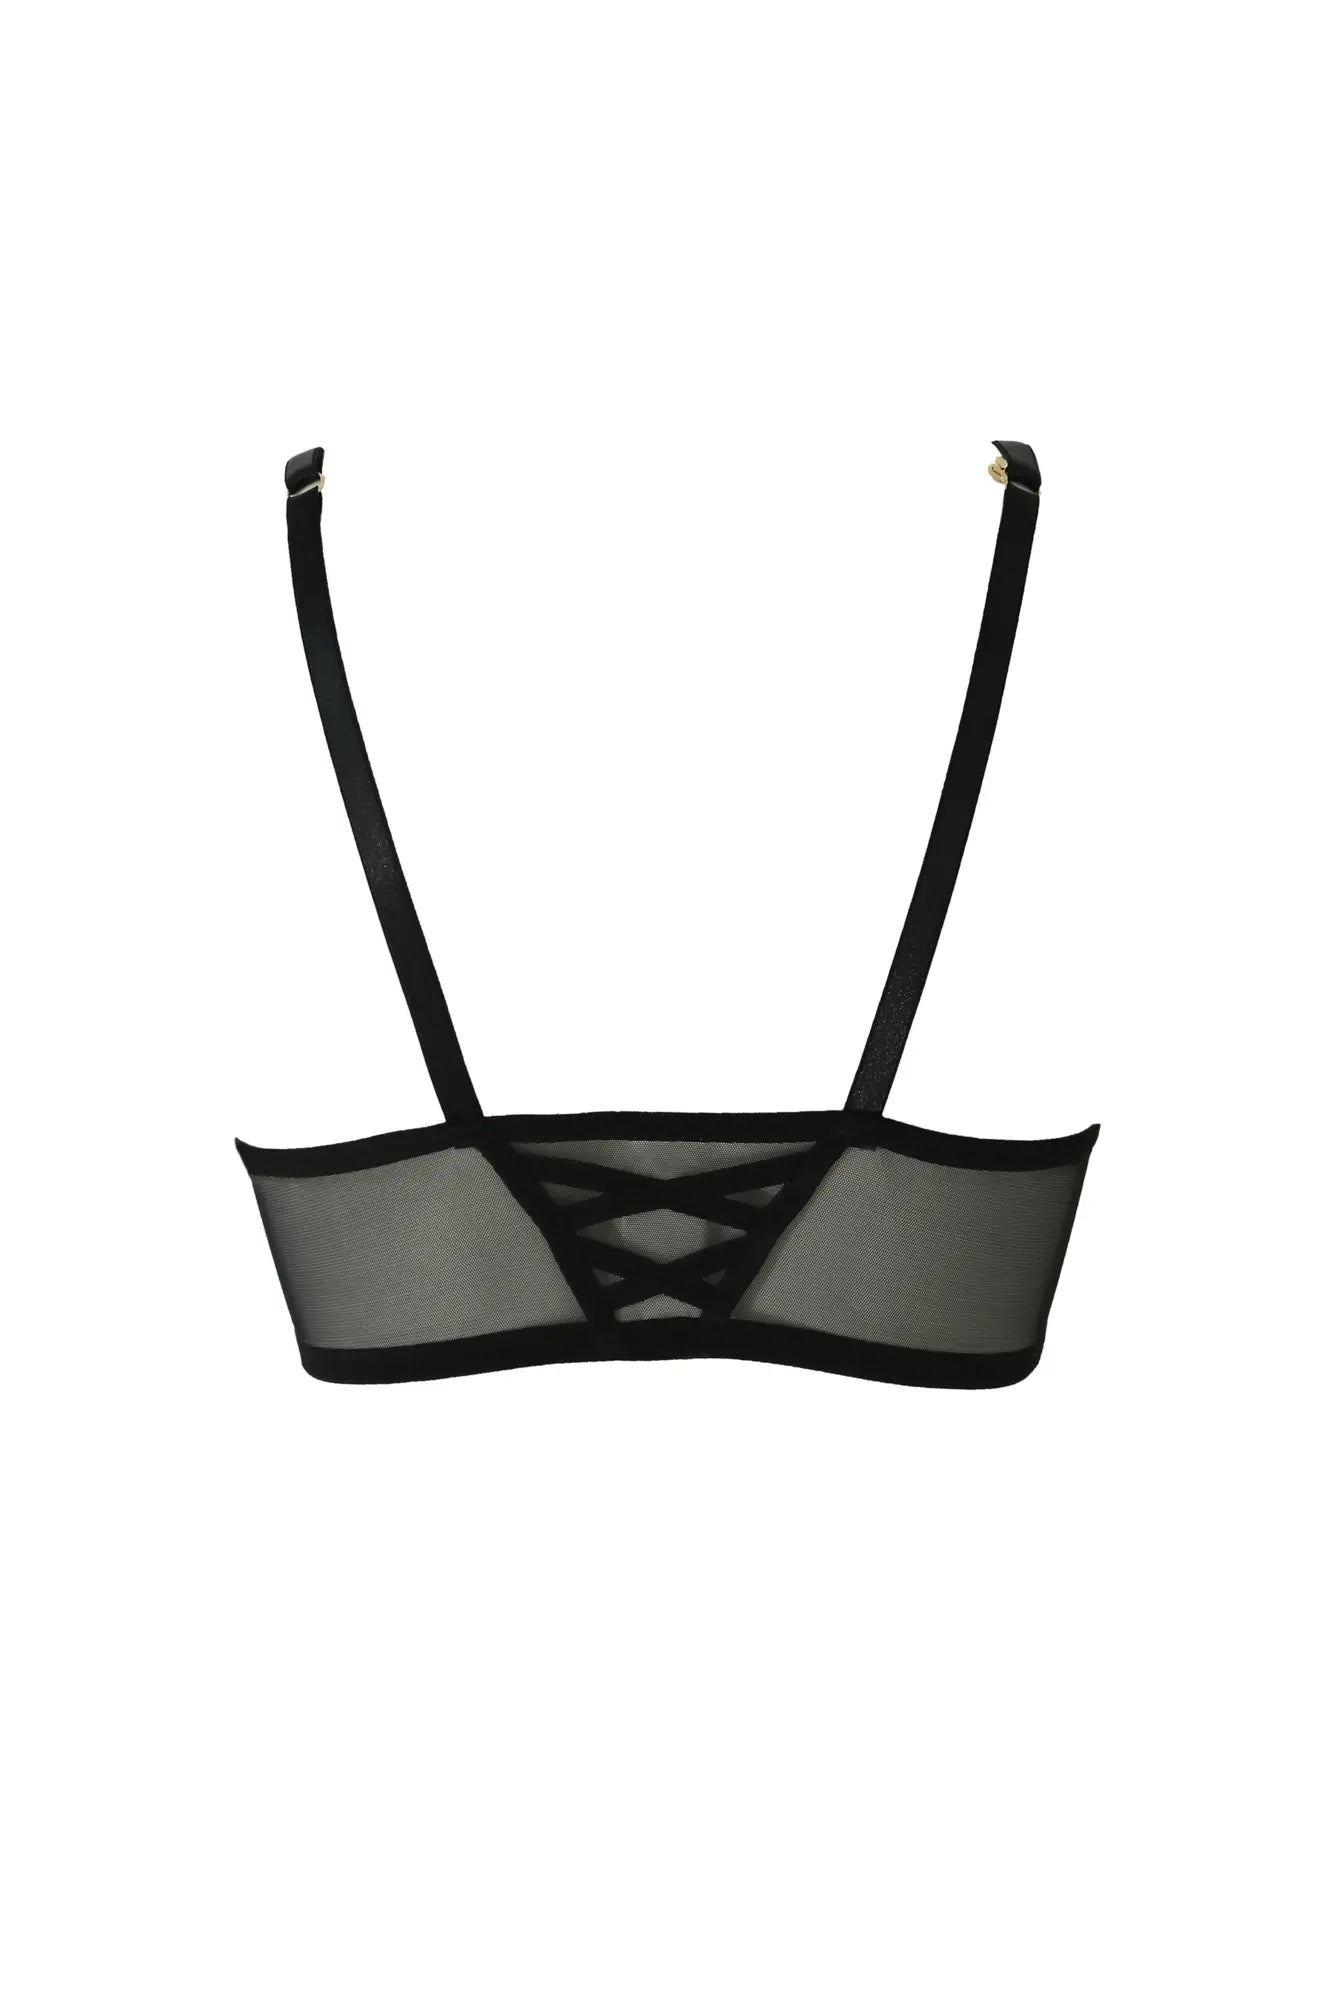 38f Push Up Bra - Get Best Price from Manufacturers & Suppliers in